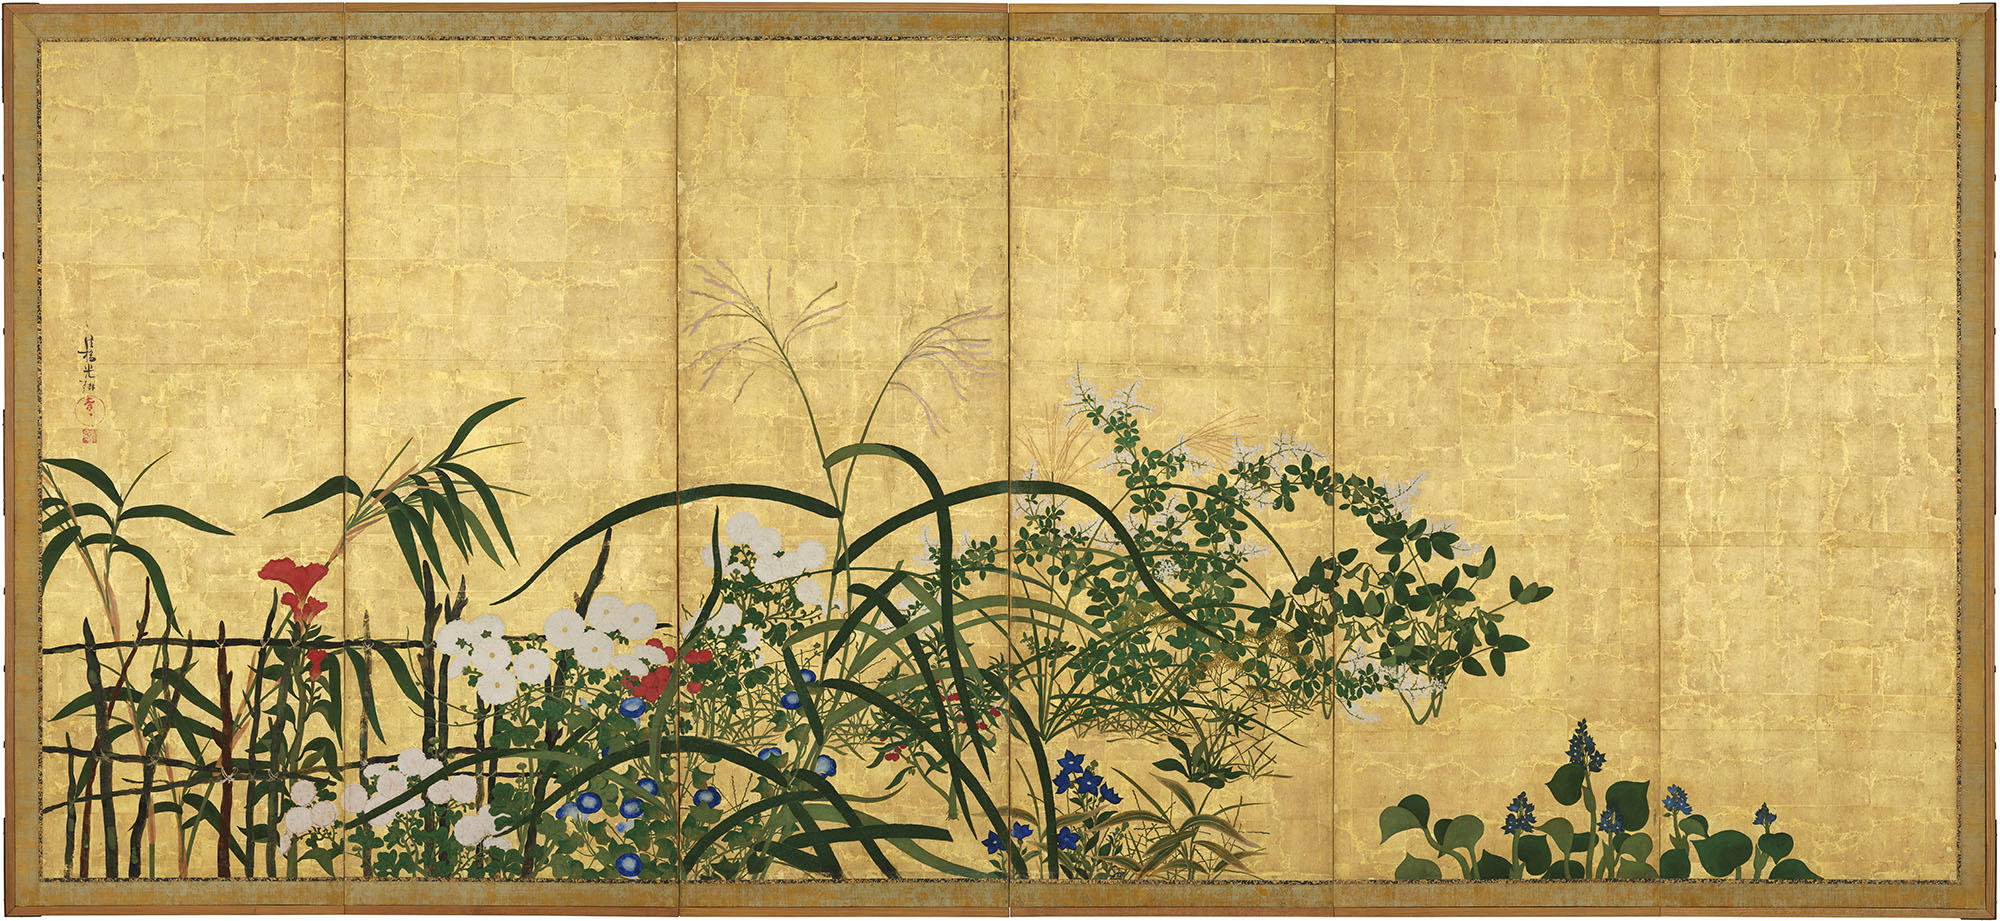 A six panel gold ground painting with plants that bloom in autumn in Japan including from left to right: fishpole bamboo, cockscomb, chrysanthemum, morning glory, bush clover, jasmine, Chinese silver grass, balloon flower, and water hyacinth.